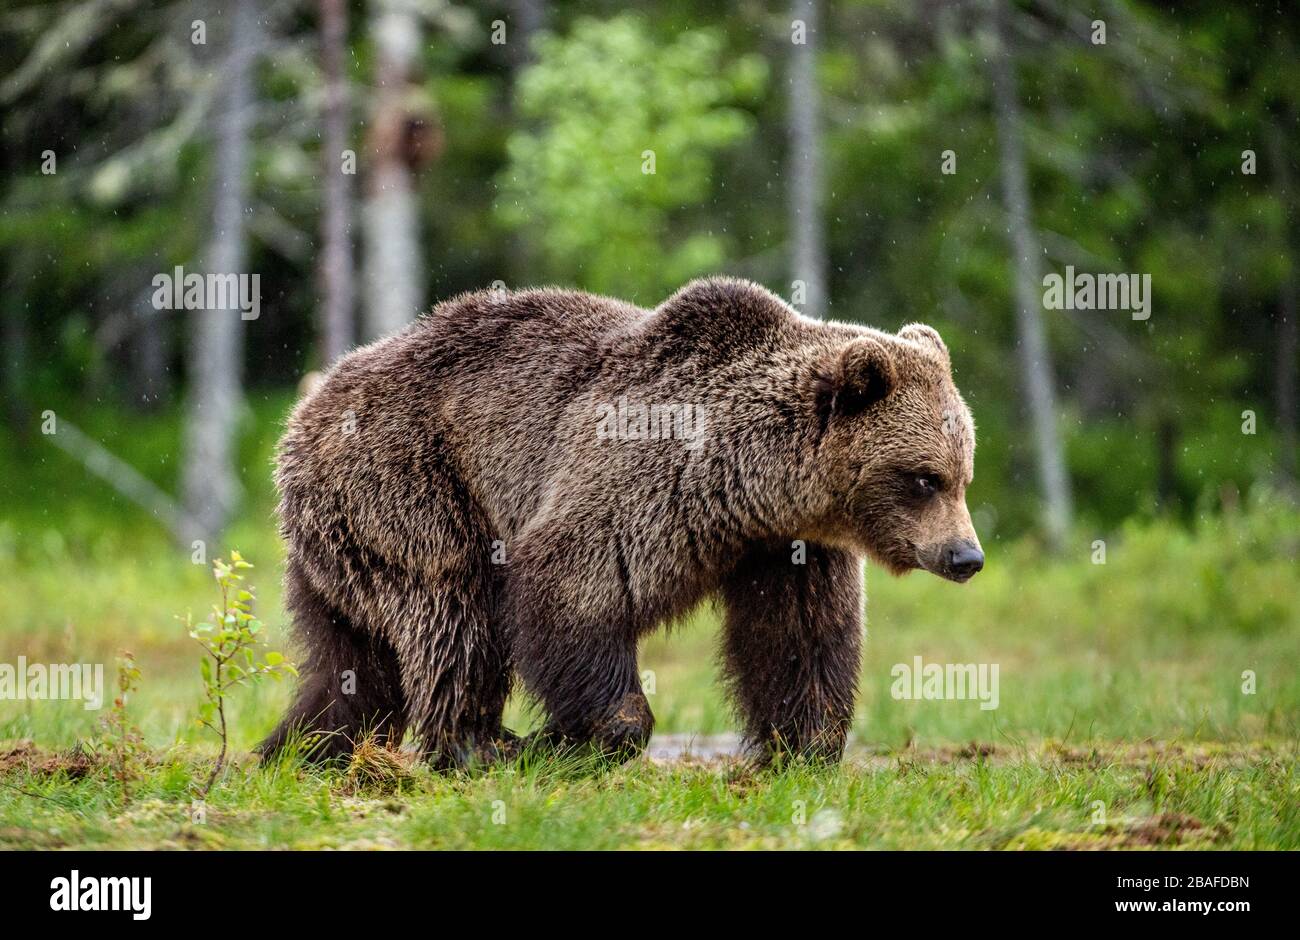 Brown bear walking on the swamp in the summer forest. Scientific name: Ursus arctos. Natural habitat. Stock Photo